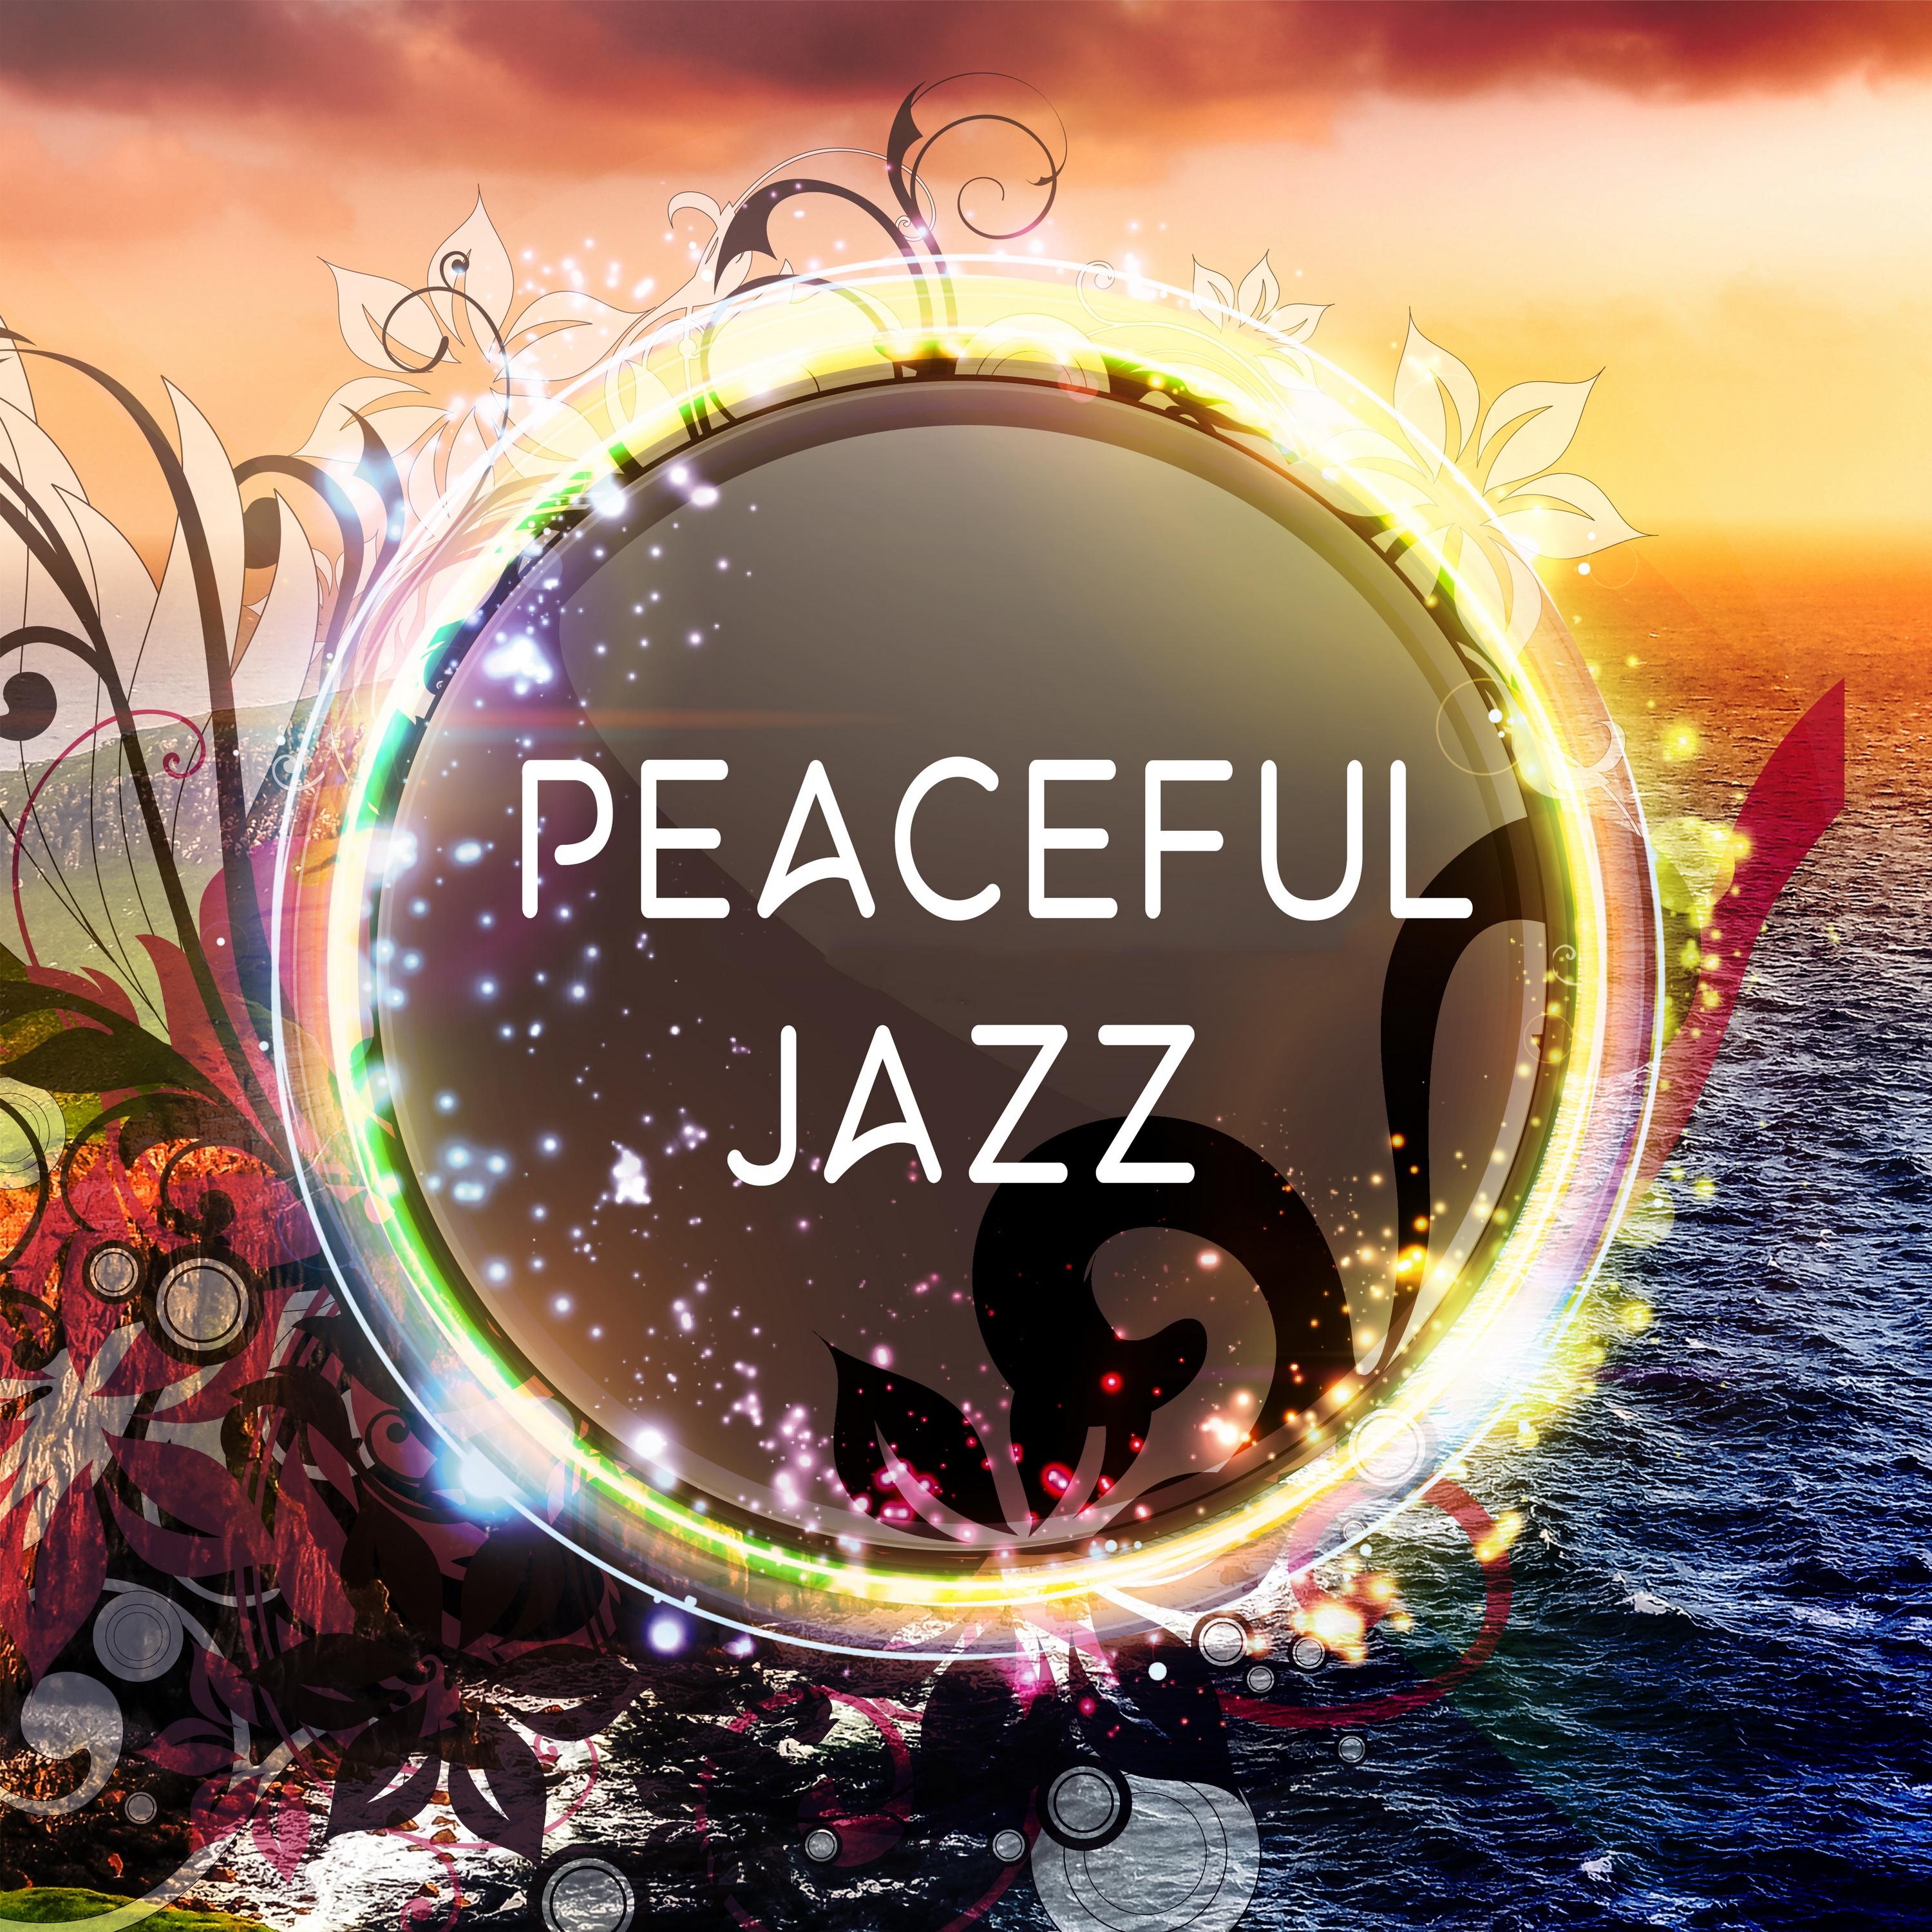 Peaceful Jazz – Piano Instrumental Lounge, Music for Relax, Ambient Jazz Night, Calming Jazz